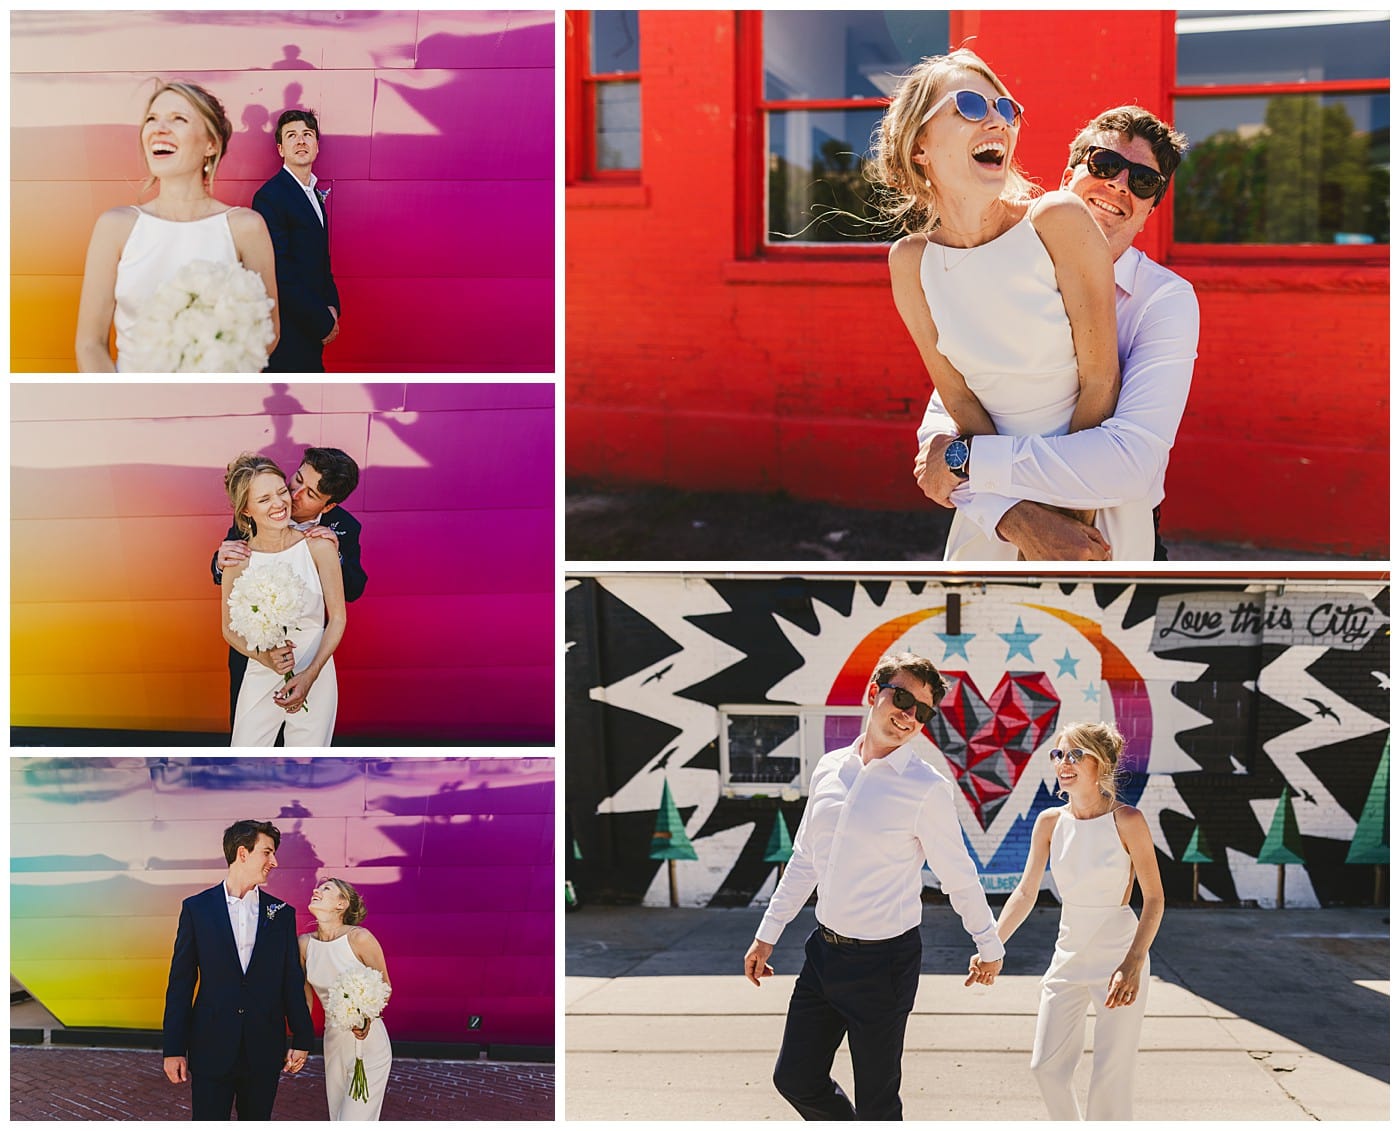 Spread of images from a couple's courthouse wedding in Denver. They're laughing and kissing in front of colorful walls and murals  near the Denver Art Museum.